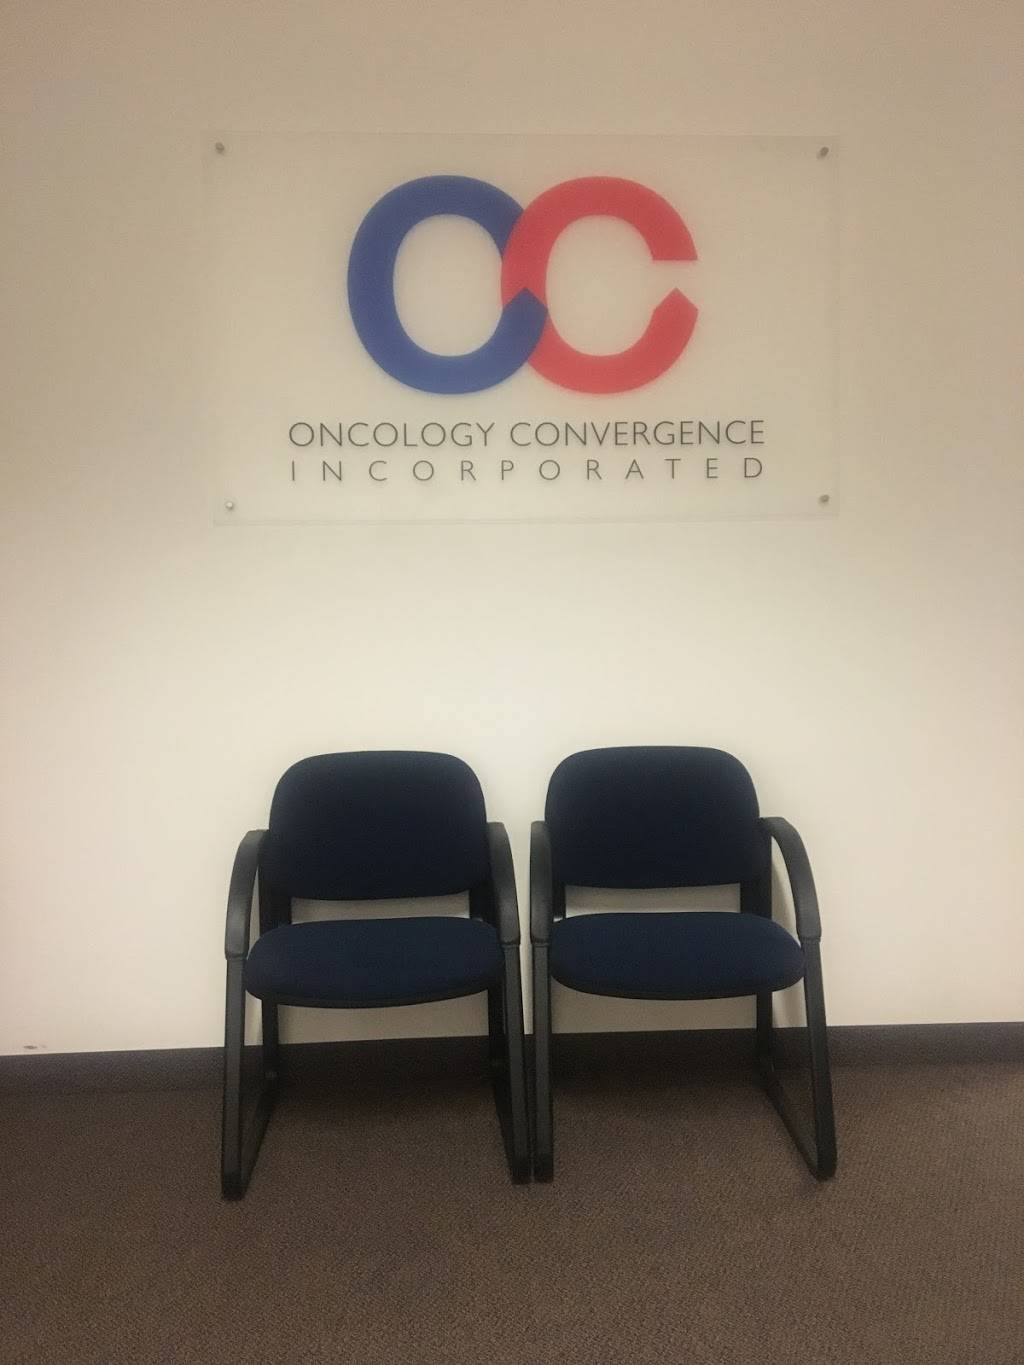 Oncology Convergence, Inc. | Oncology Revenue Cycle Management | Oncology Consultants | Billing | 8950 S 52nd St # 101, Tempe, AZ 85284, USA | Phone: (877) 754-7799